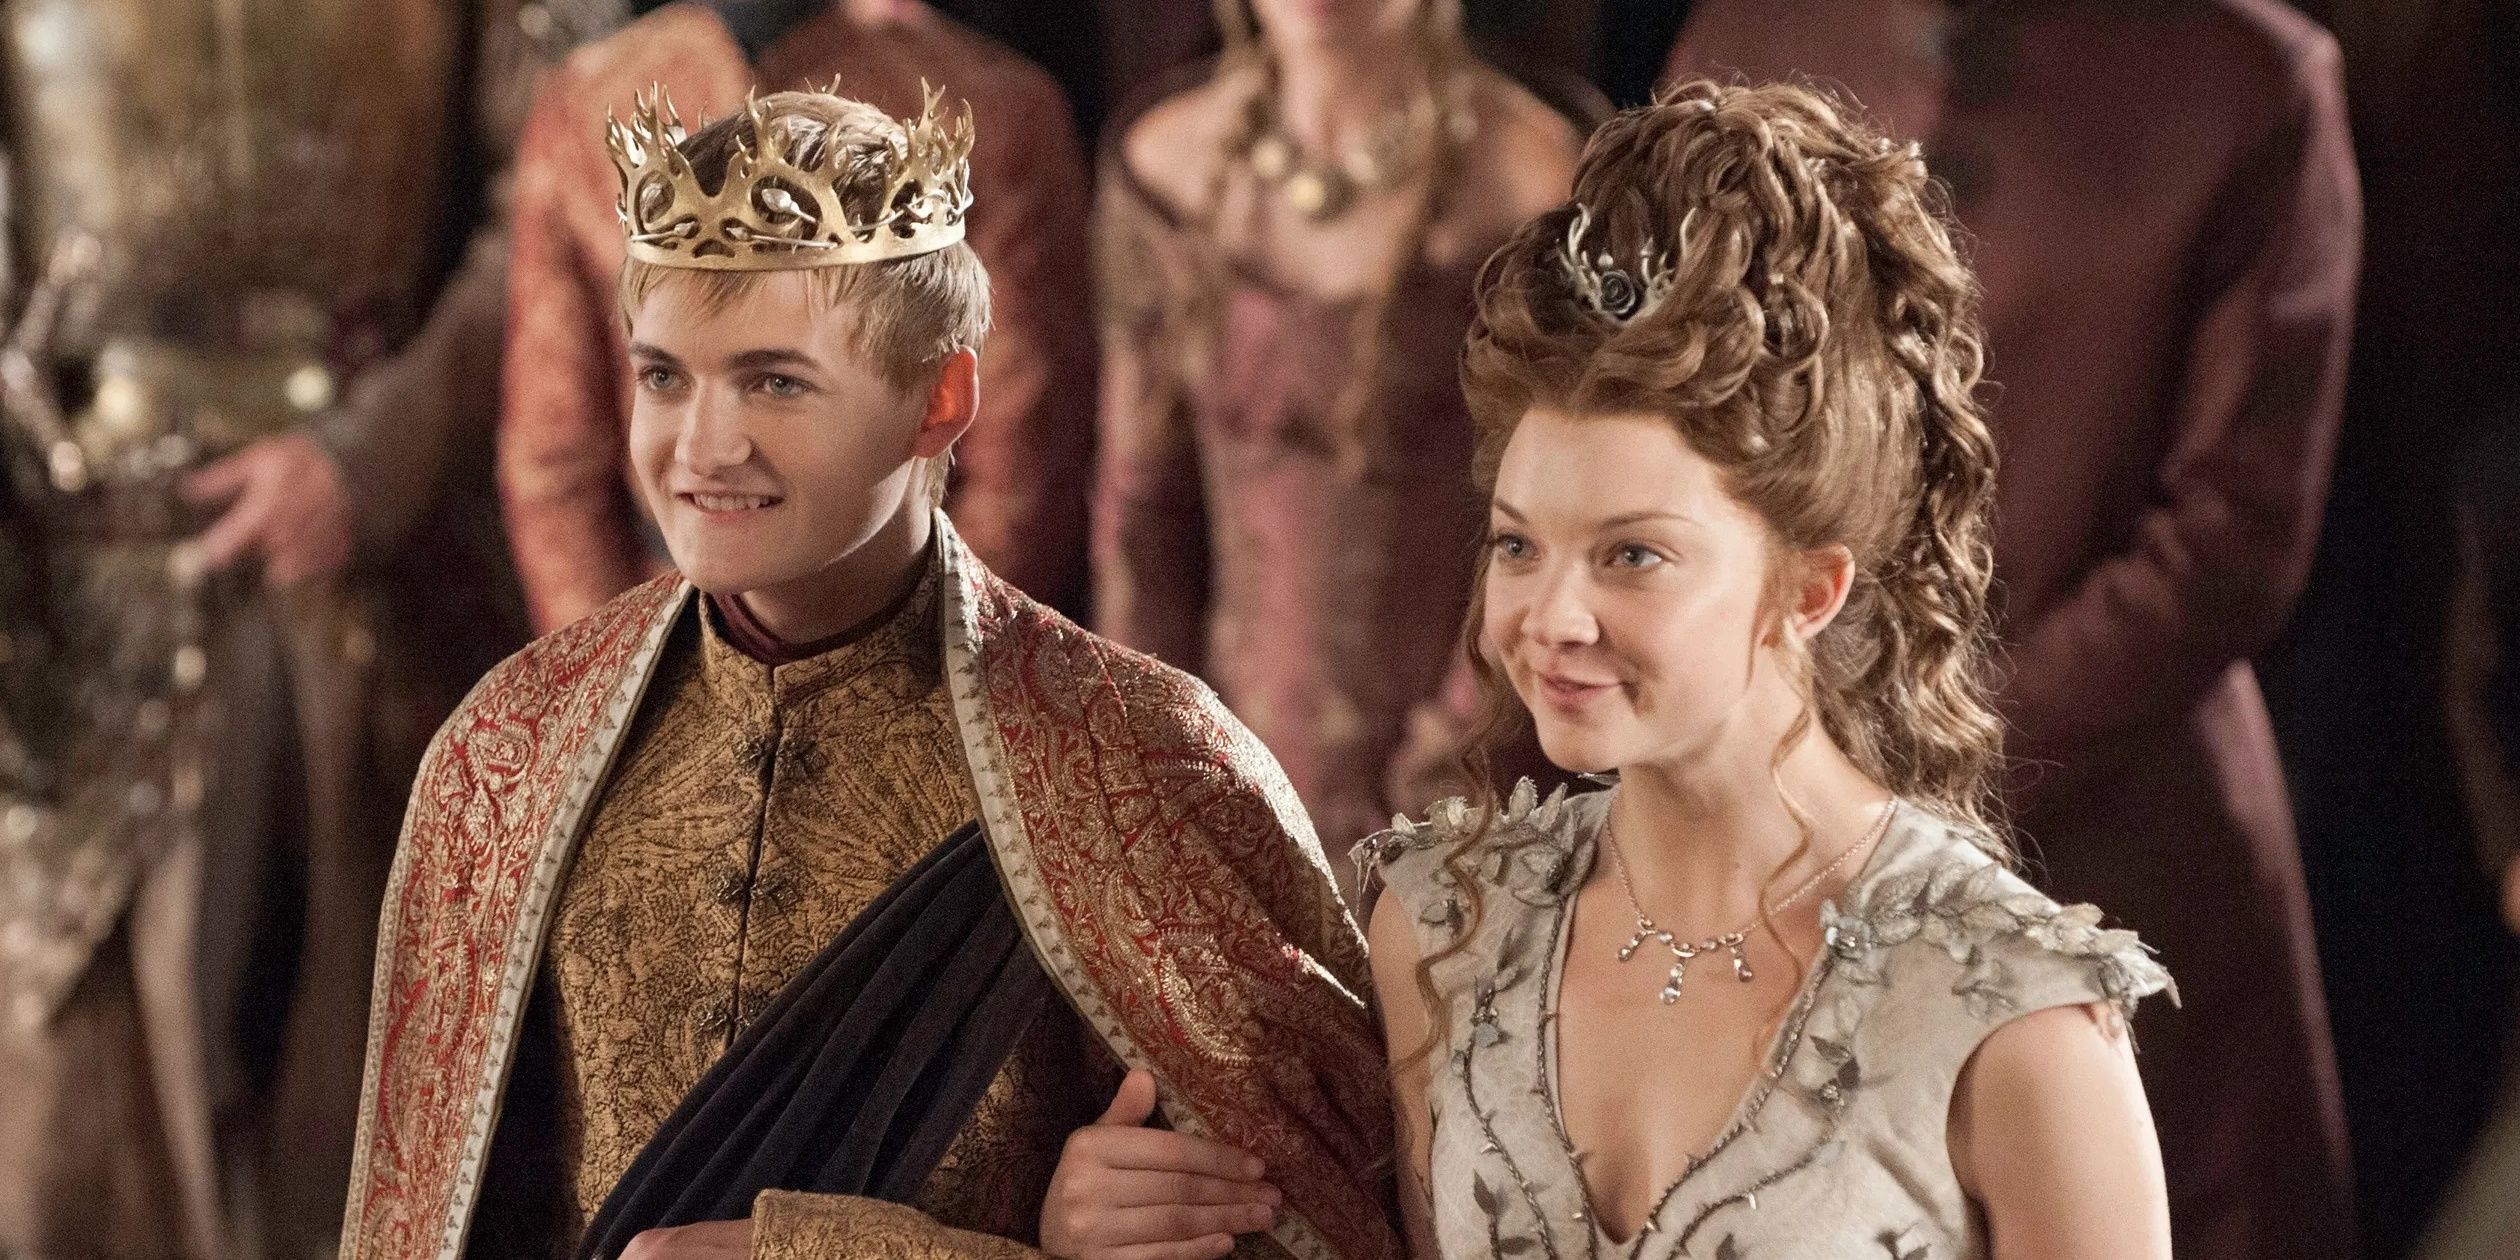 A Lannister Wedding In Game Of Thrones With Joffrey And Margaery